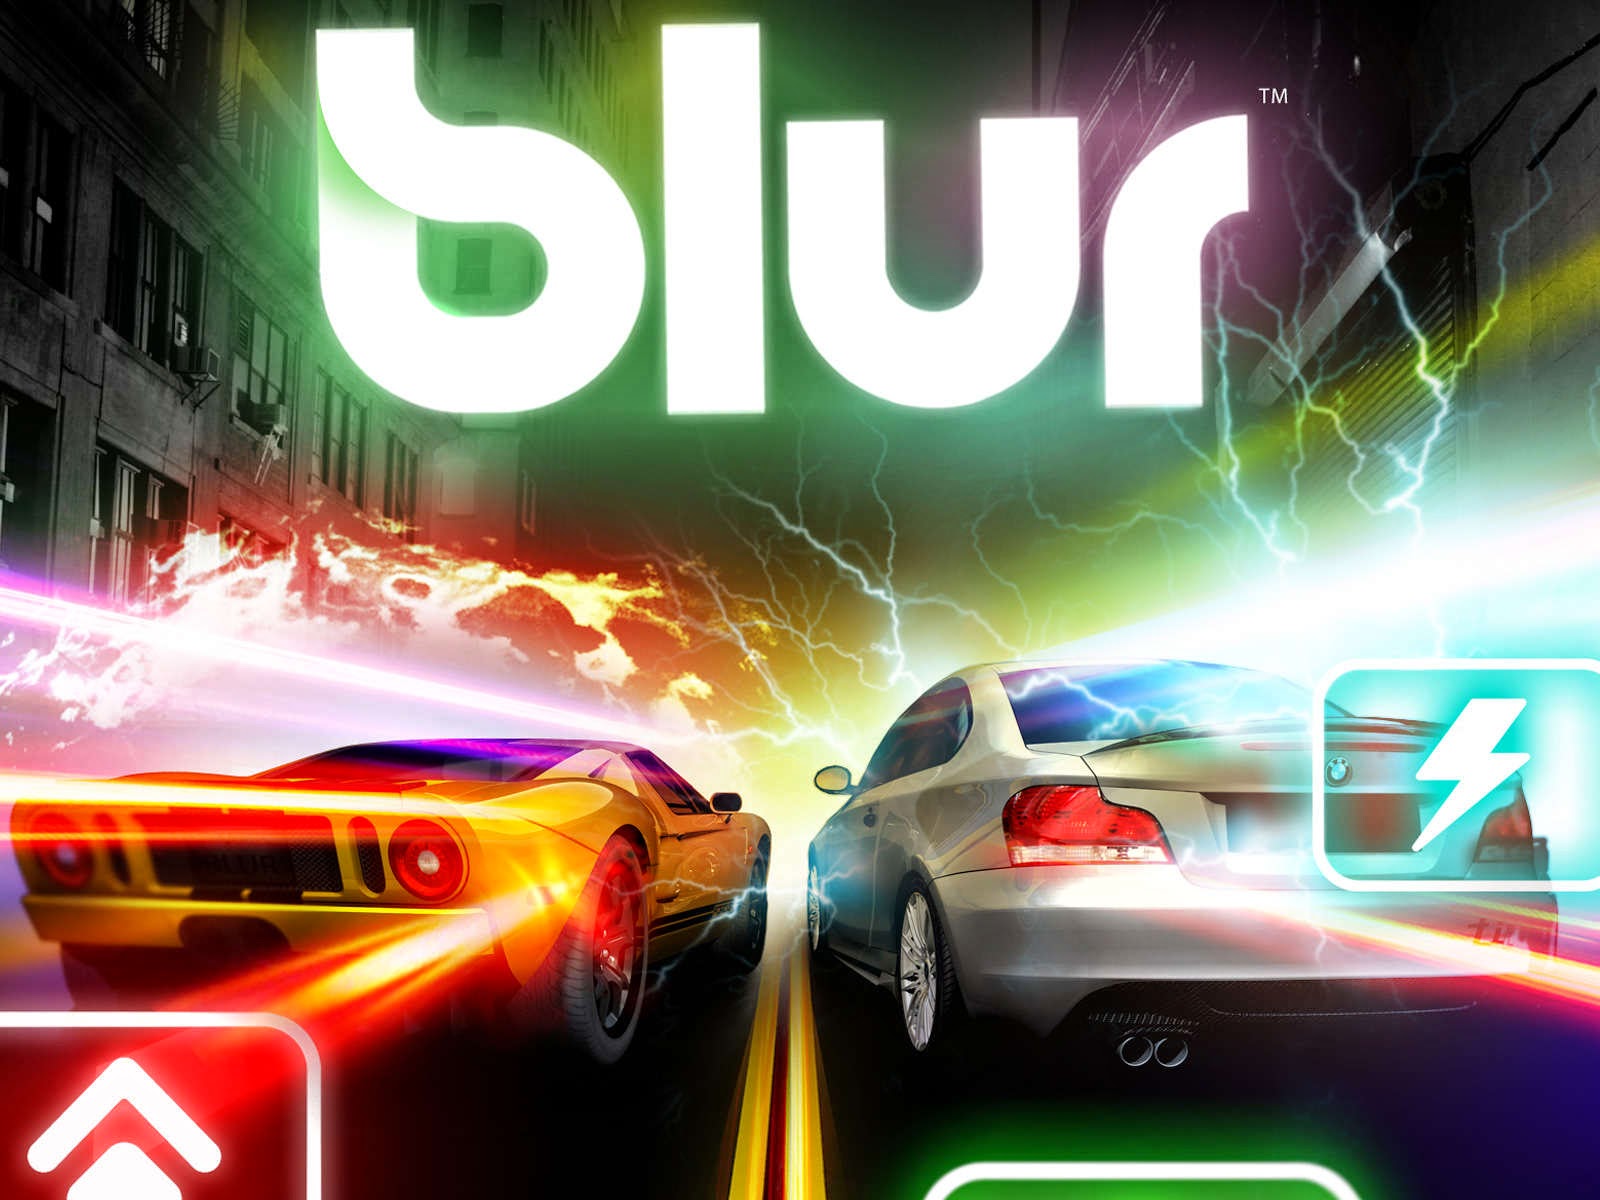 Blur game download free for pc